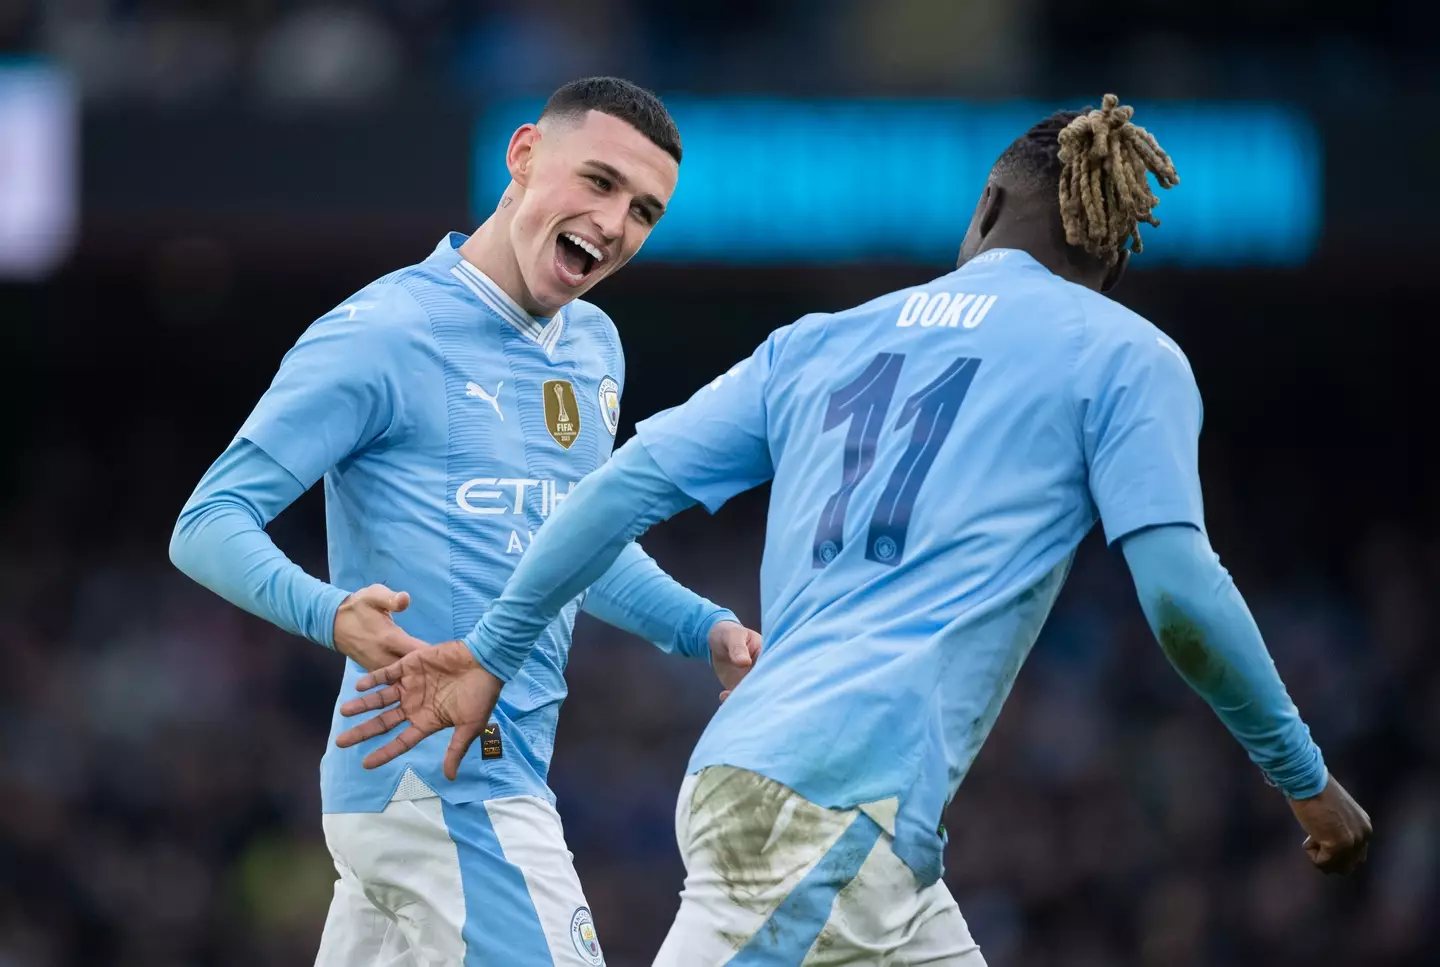 Phil Foden scored twice for Manchester City in the win over Huddersfield Town. (